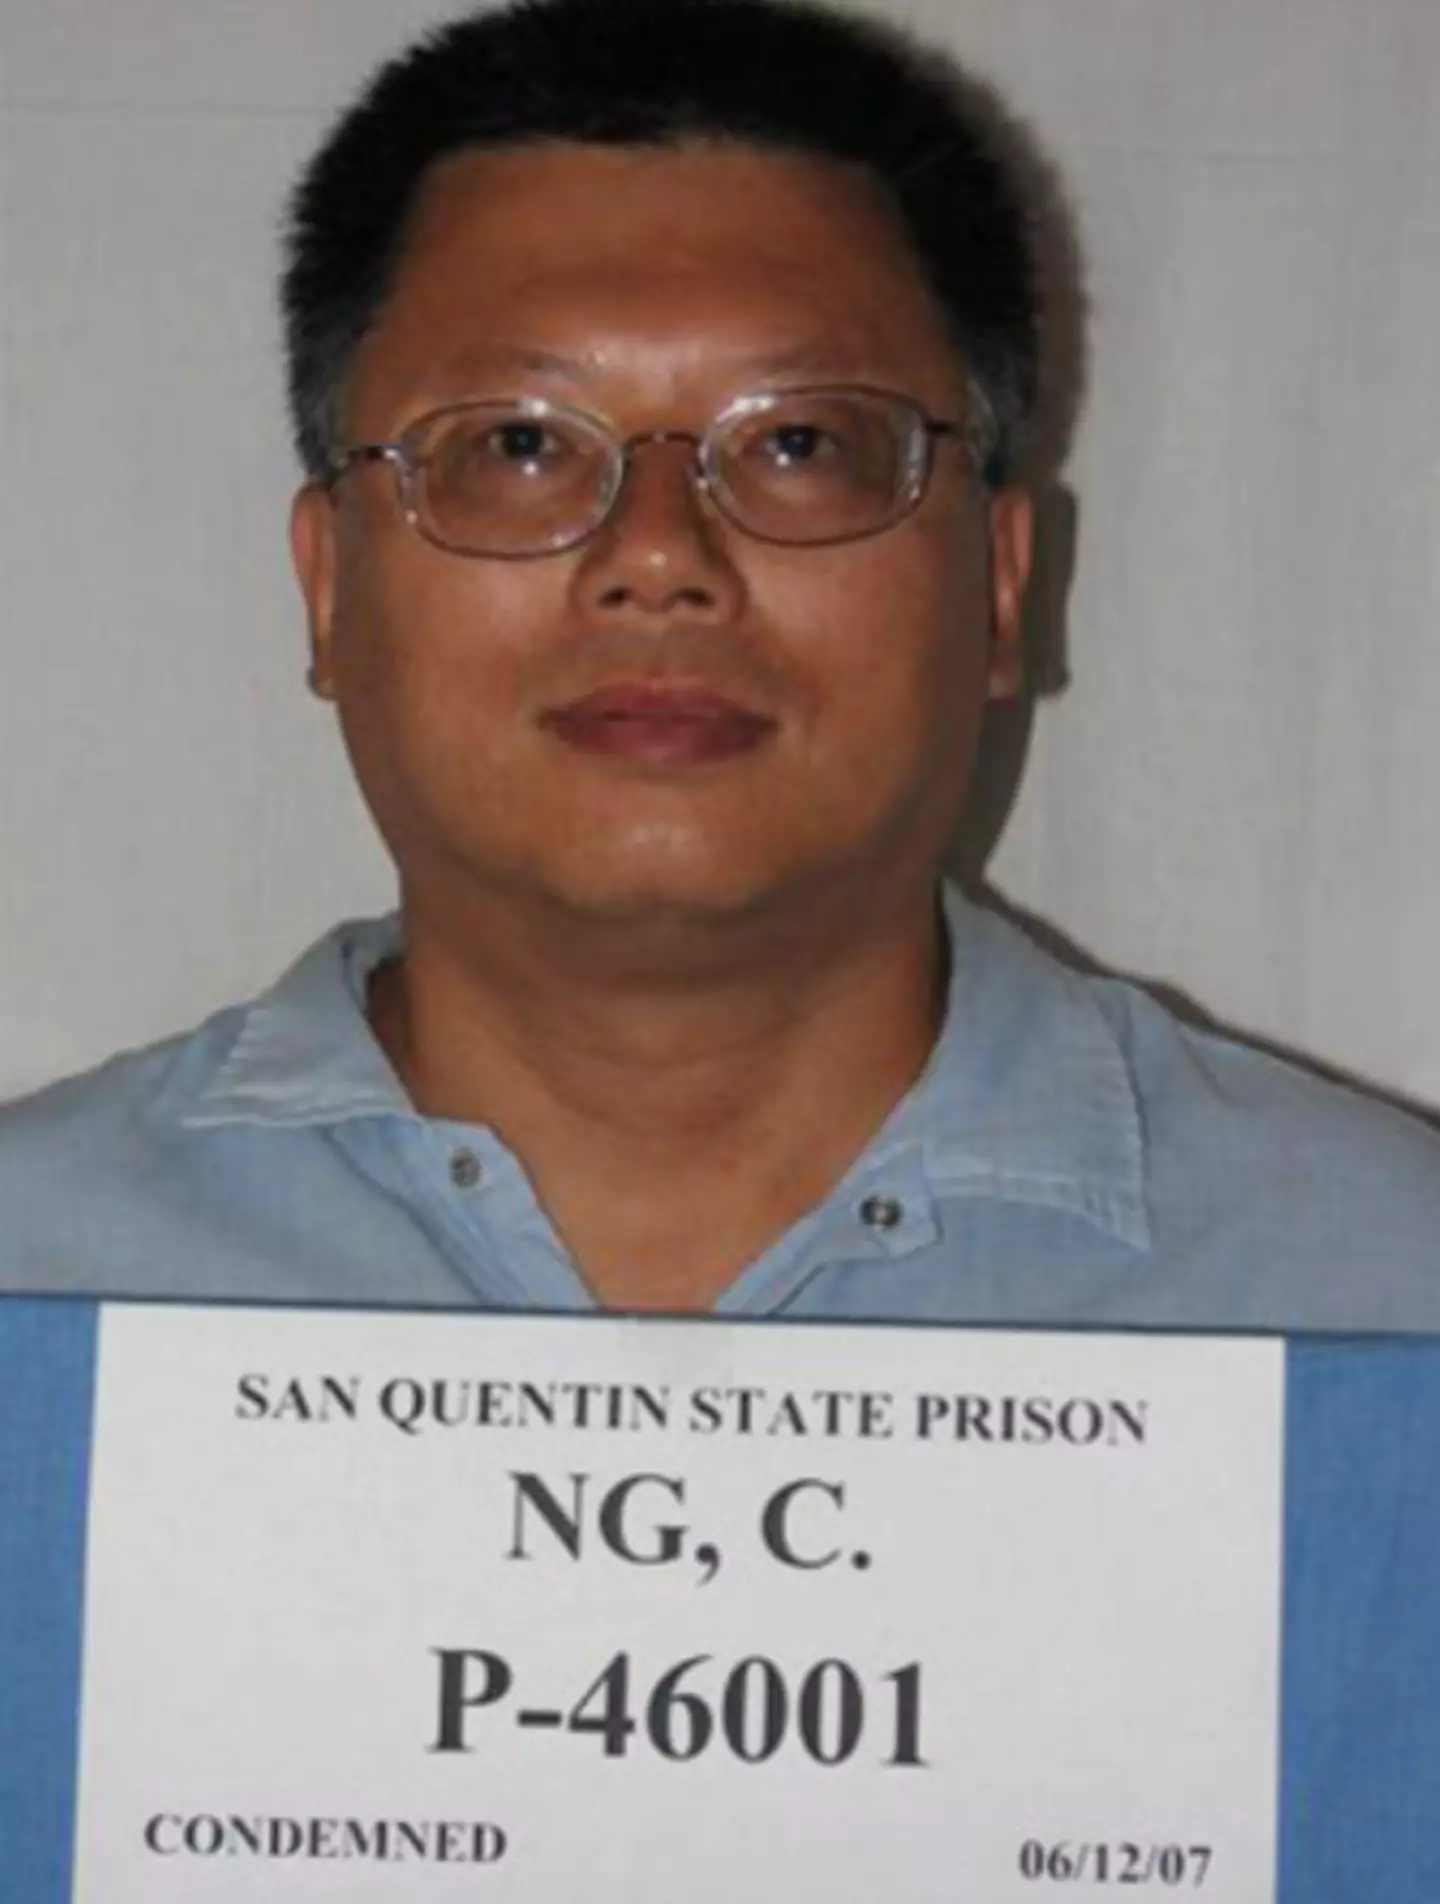 Charles Ng is currently on death row.